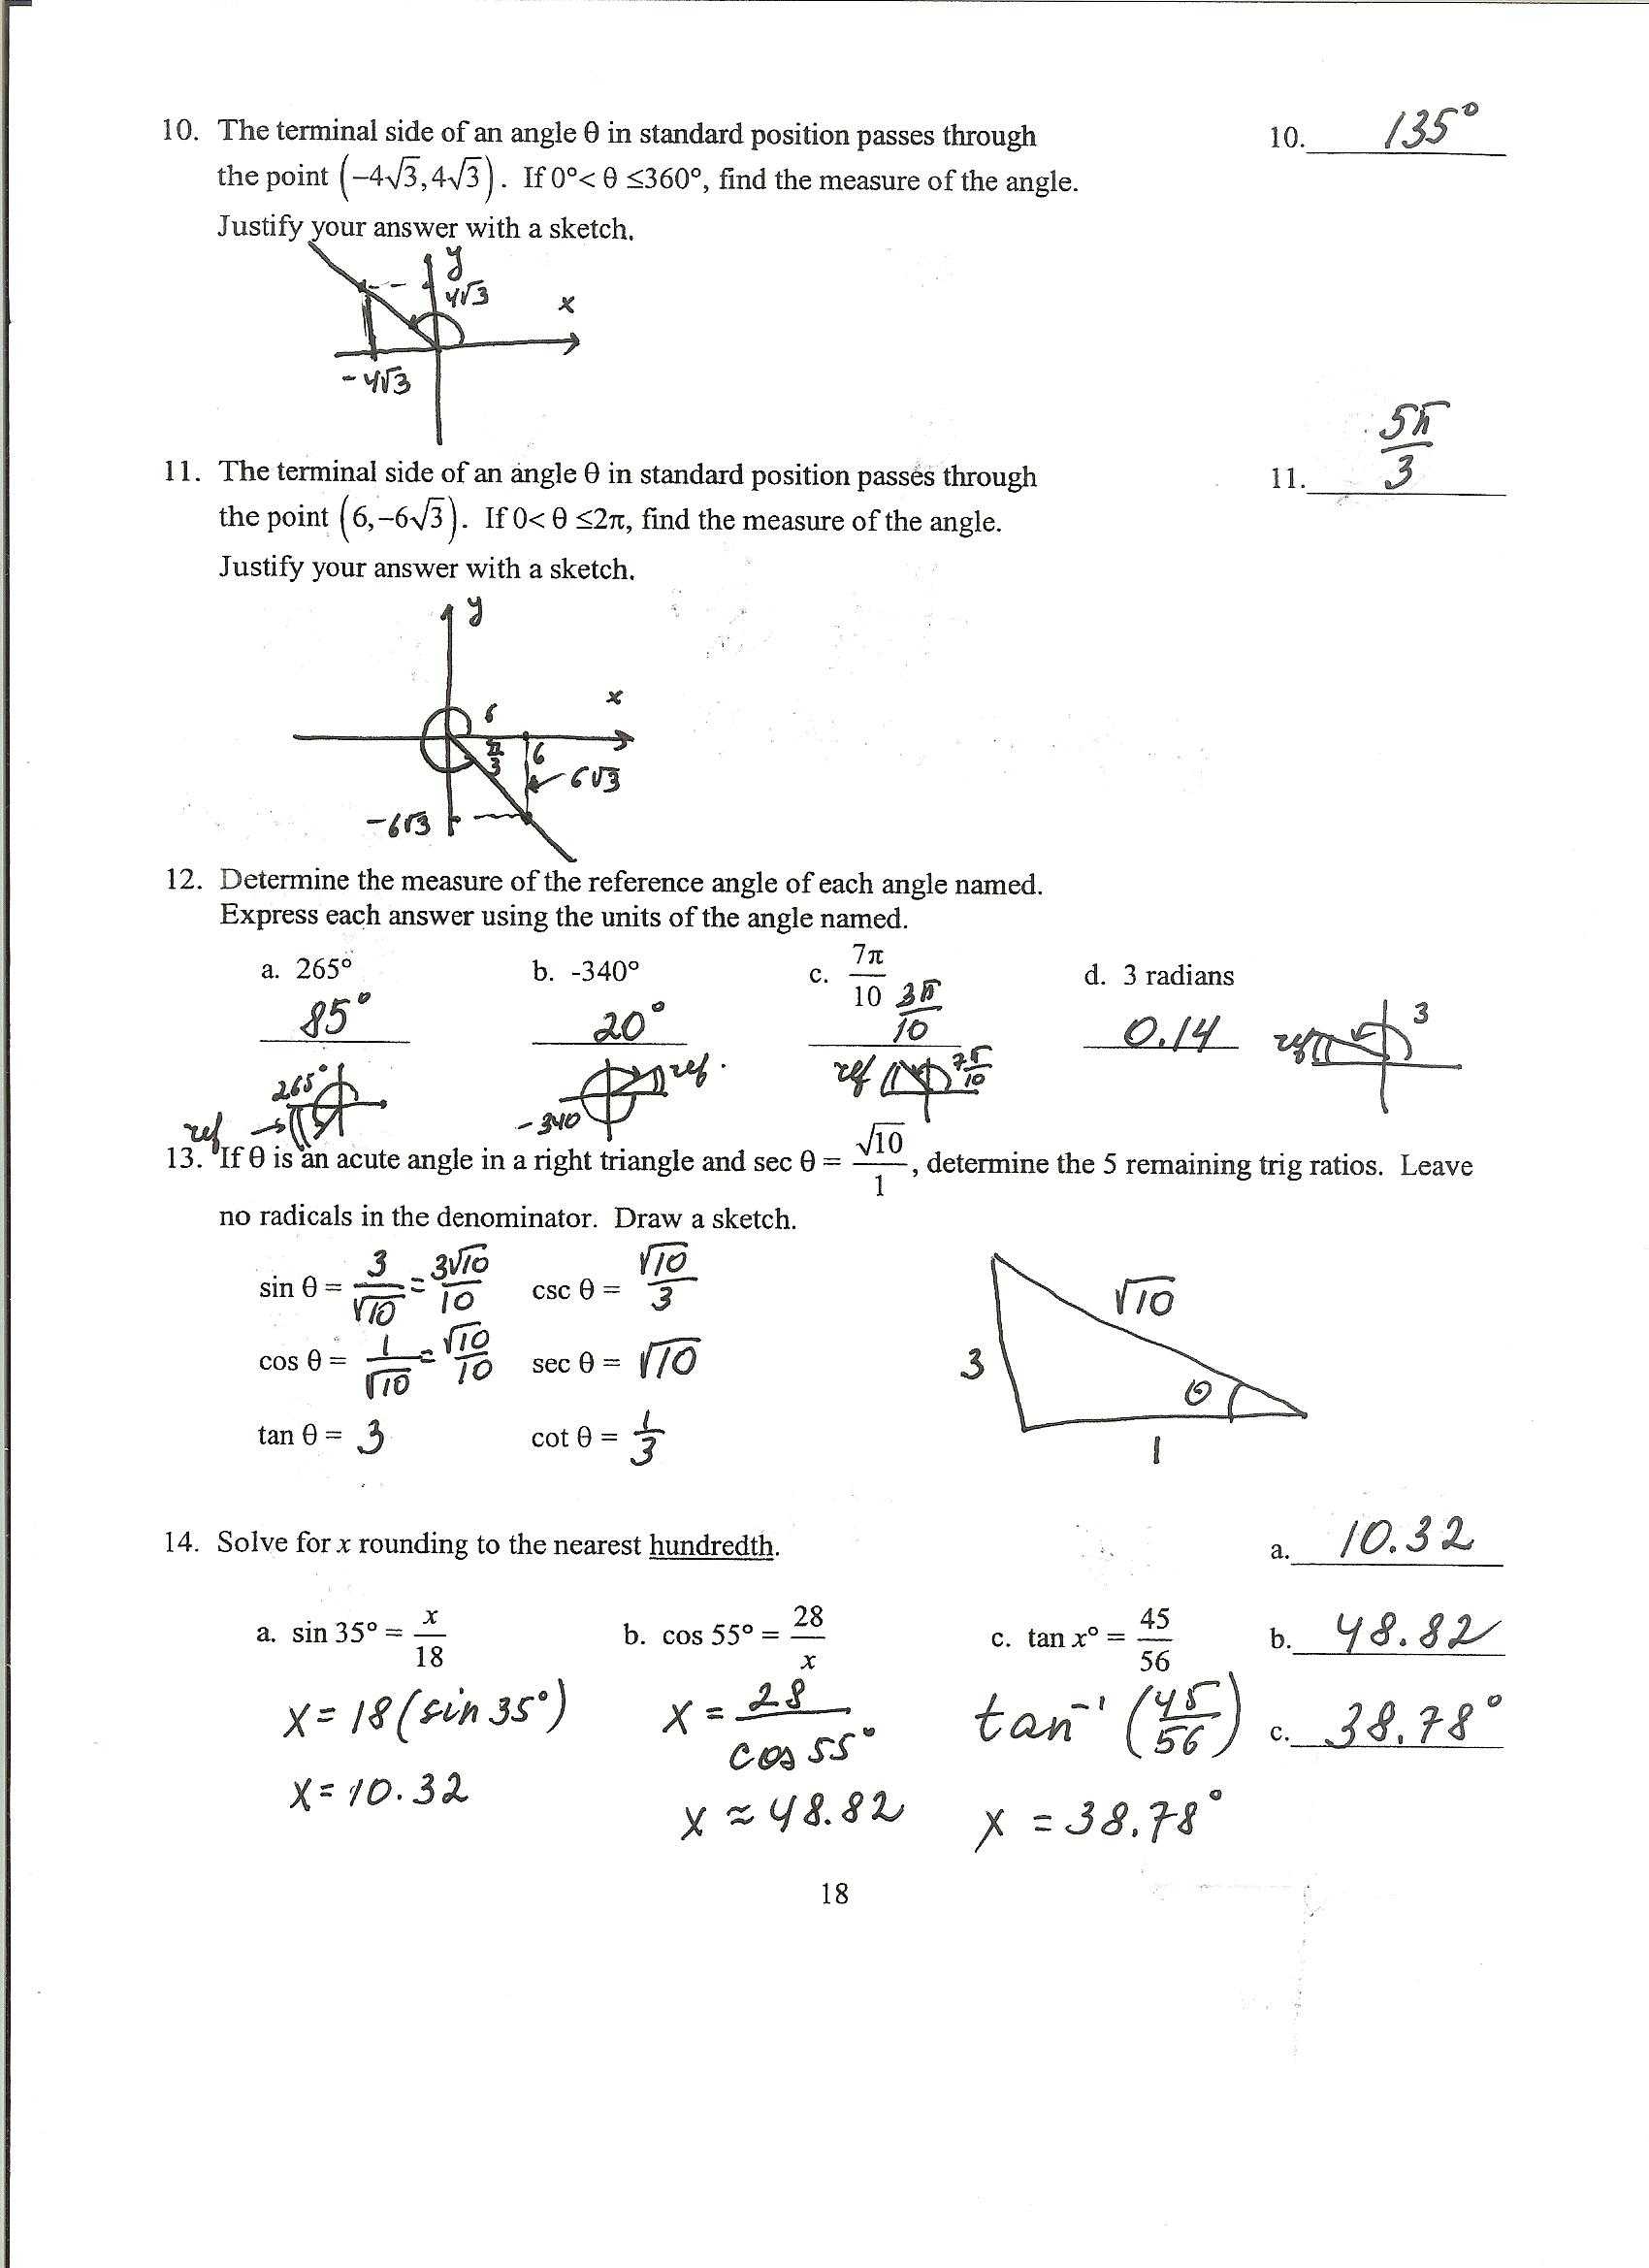 Solving and Graphing Inequalities Worksheet Answer Key or Precalculus Honors